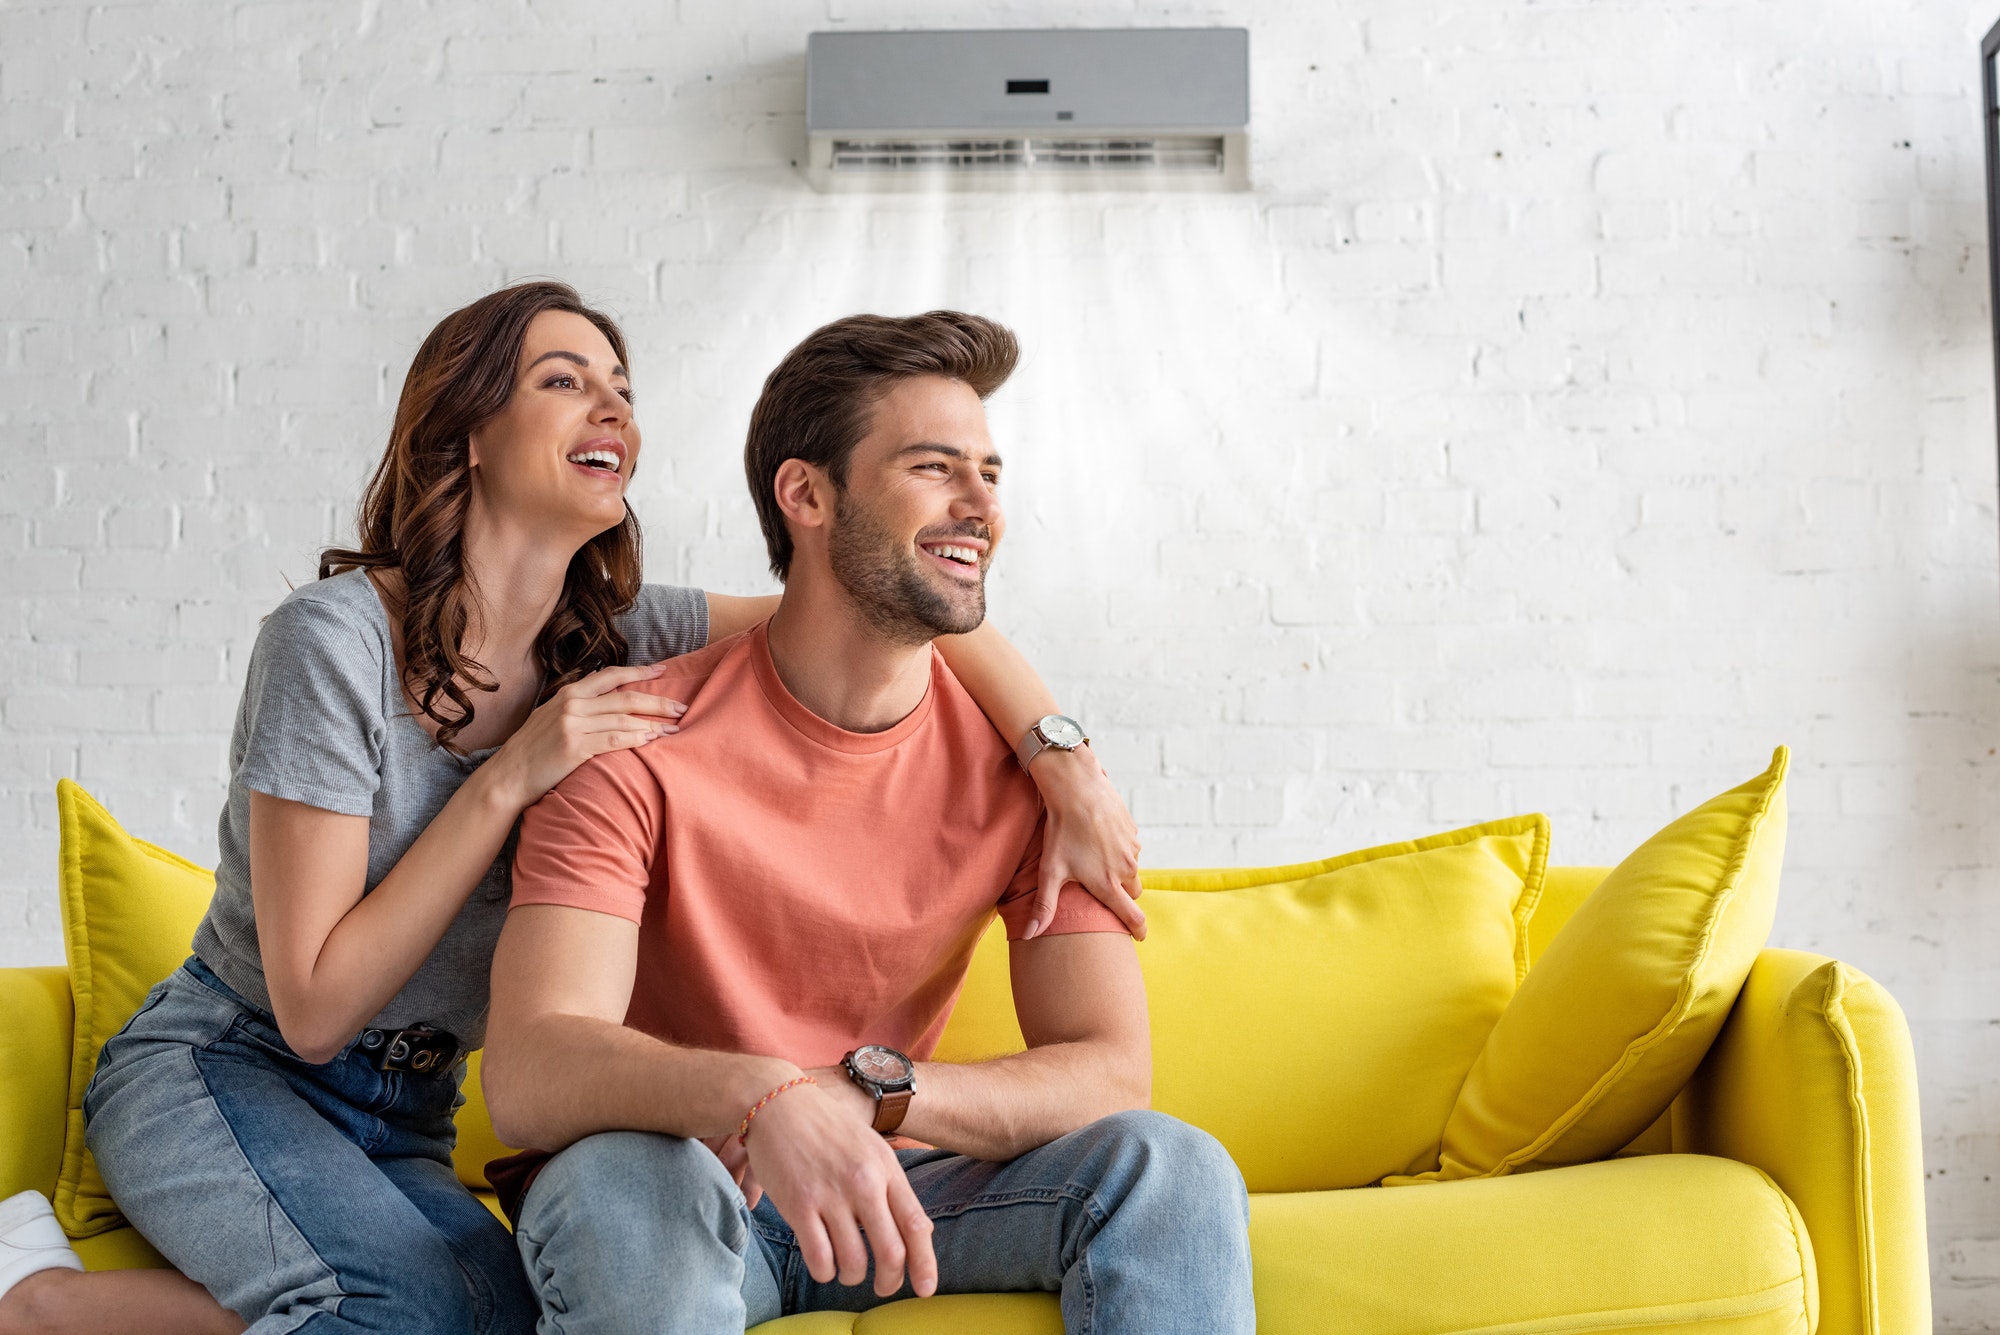 Smiling Couple Enjoying Comfort Under Home Air Conditioner